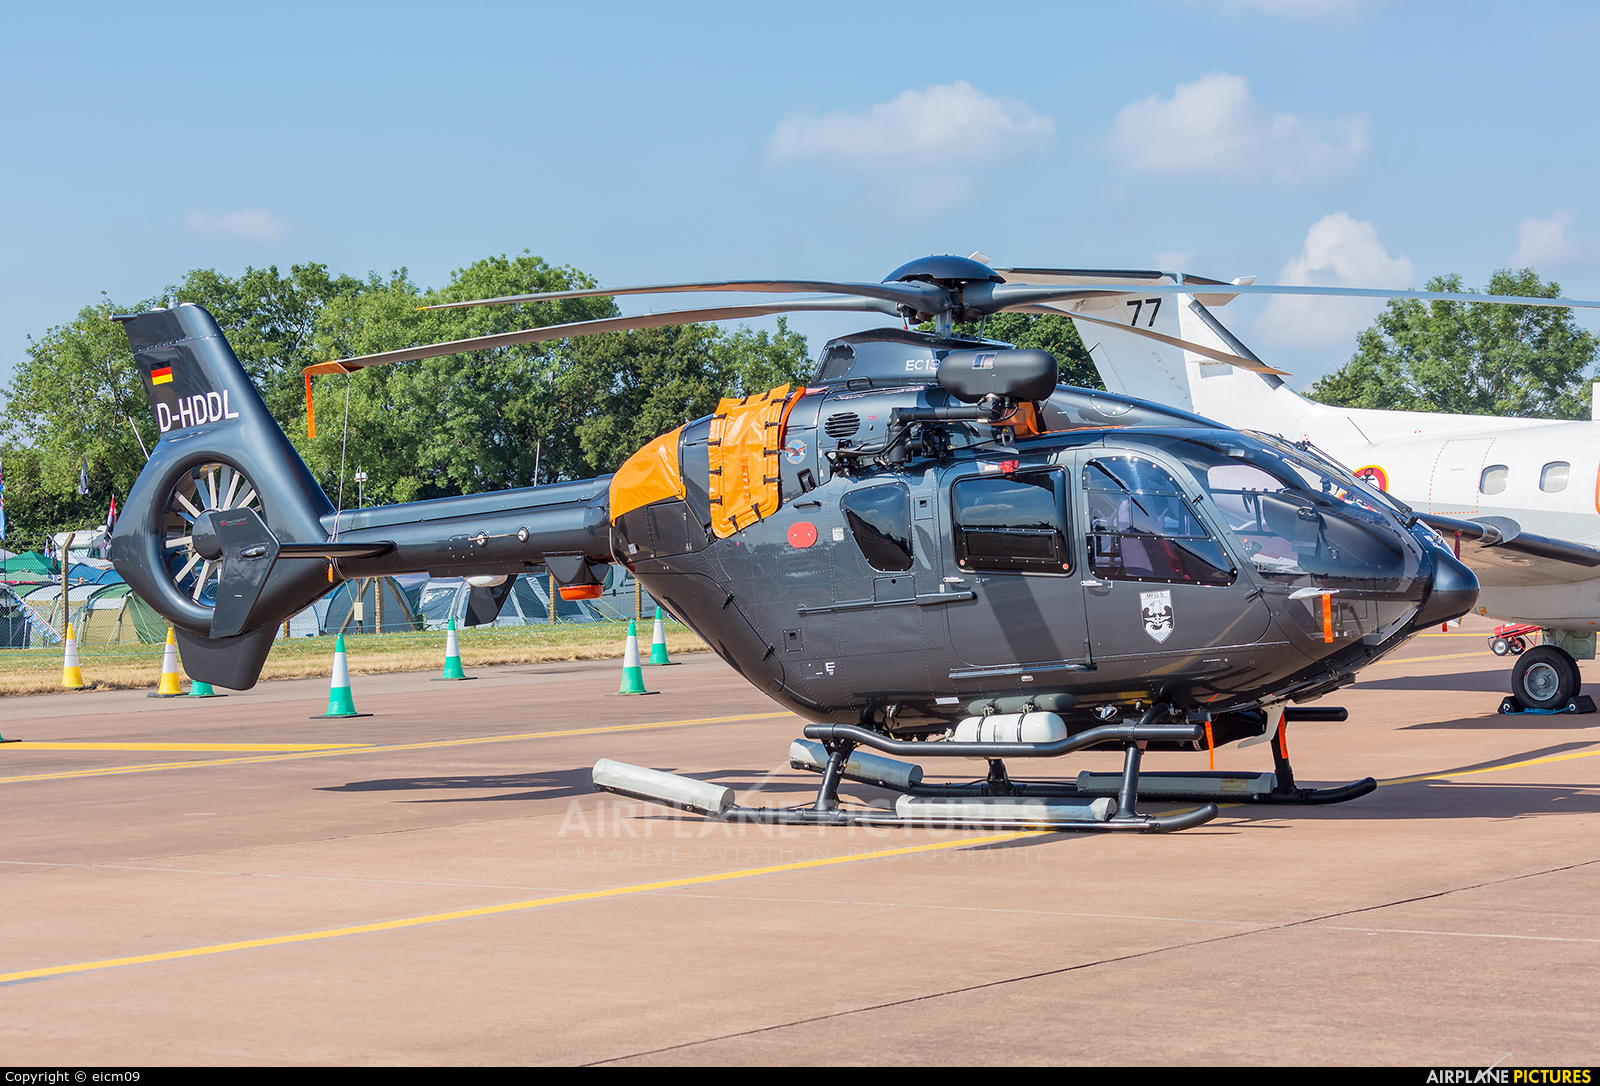 Germany - Navy D-HDDL aircraft at Fairford